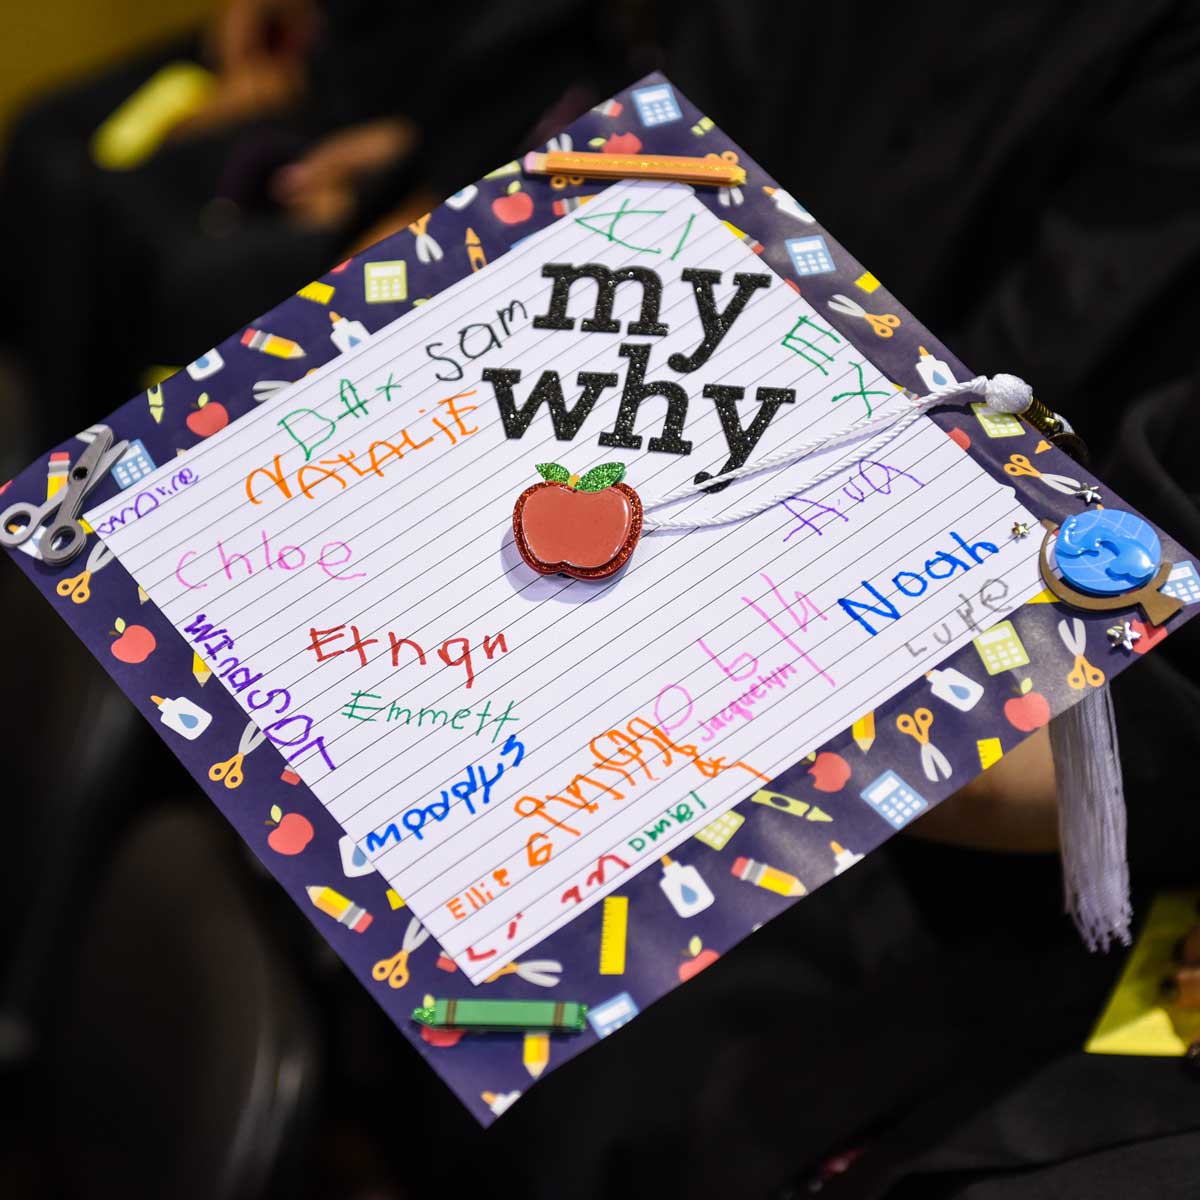 Grad cap decorated with children's signatures on notebook paper